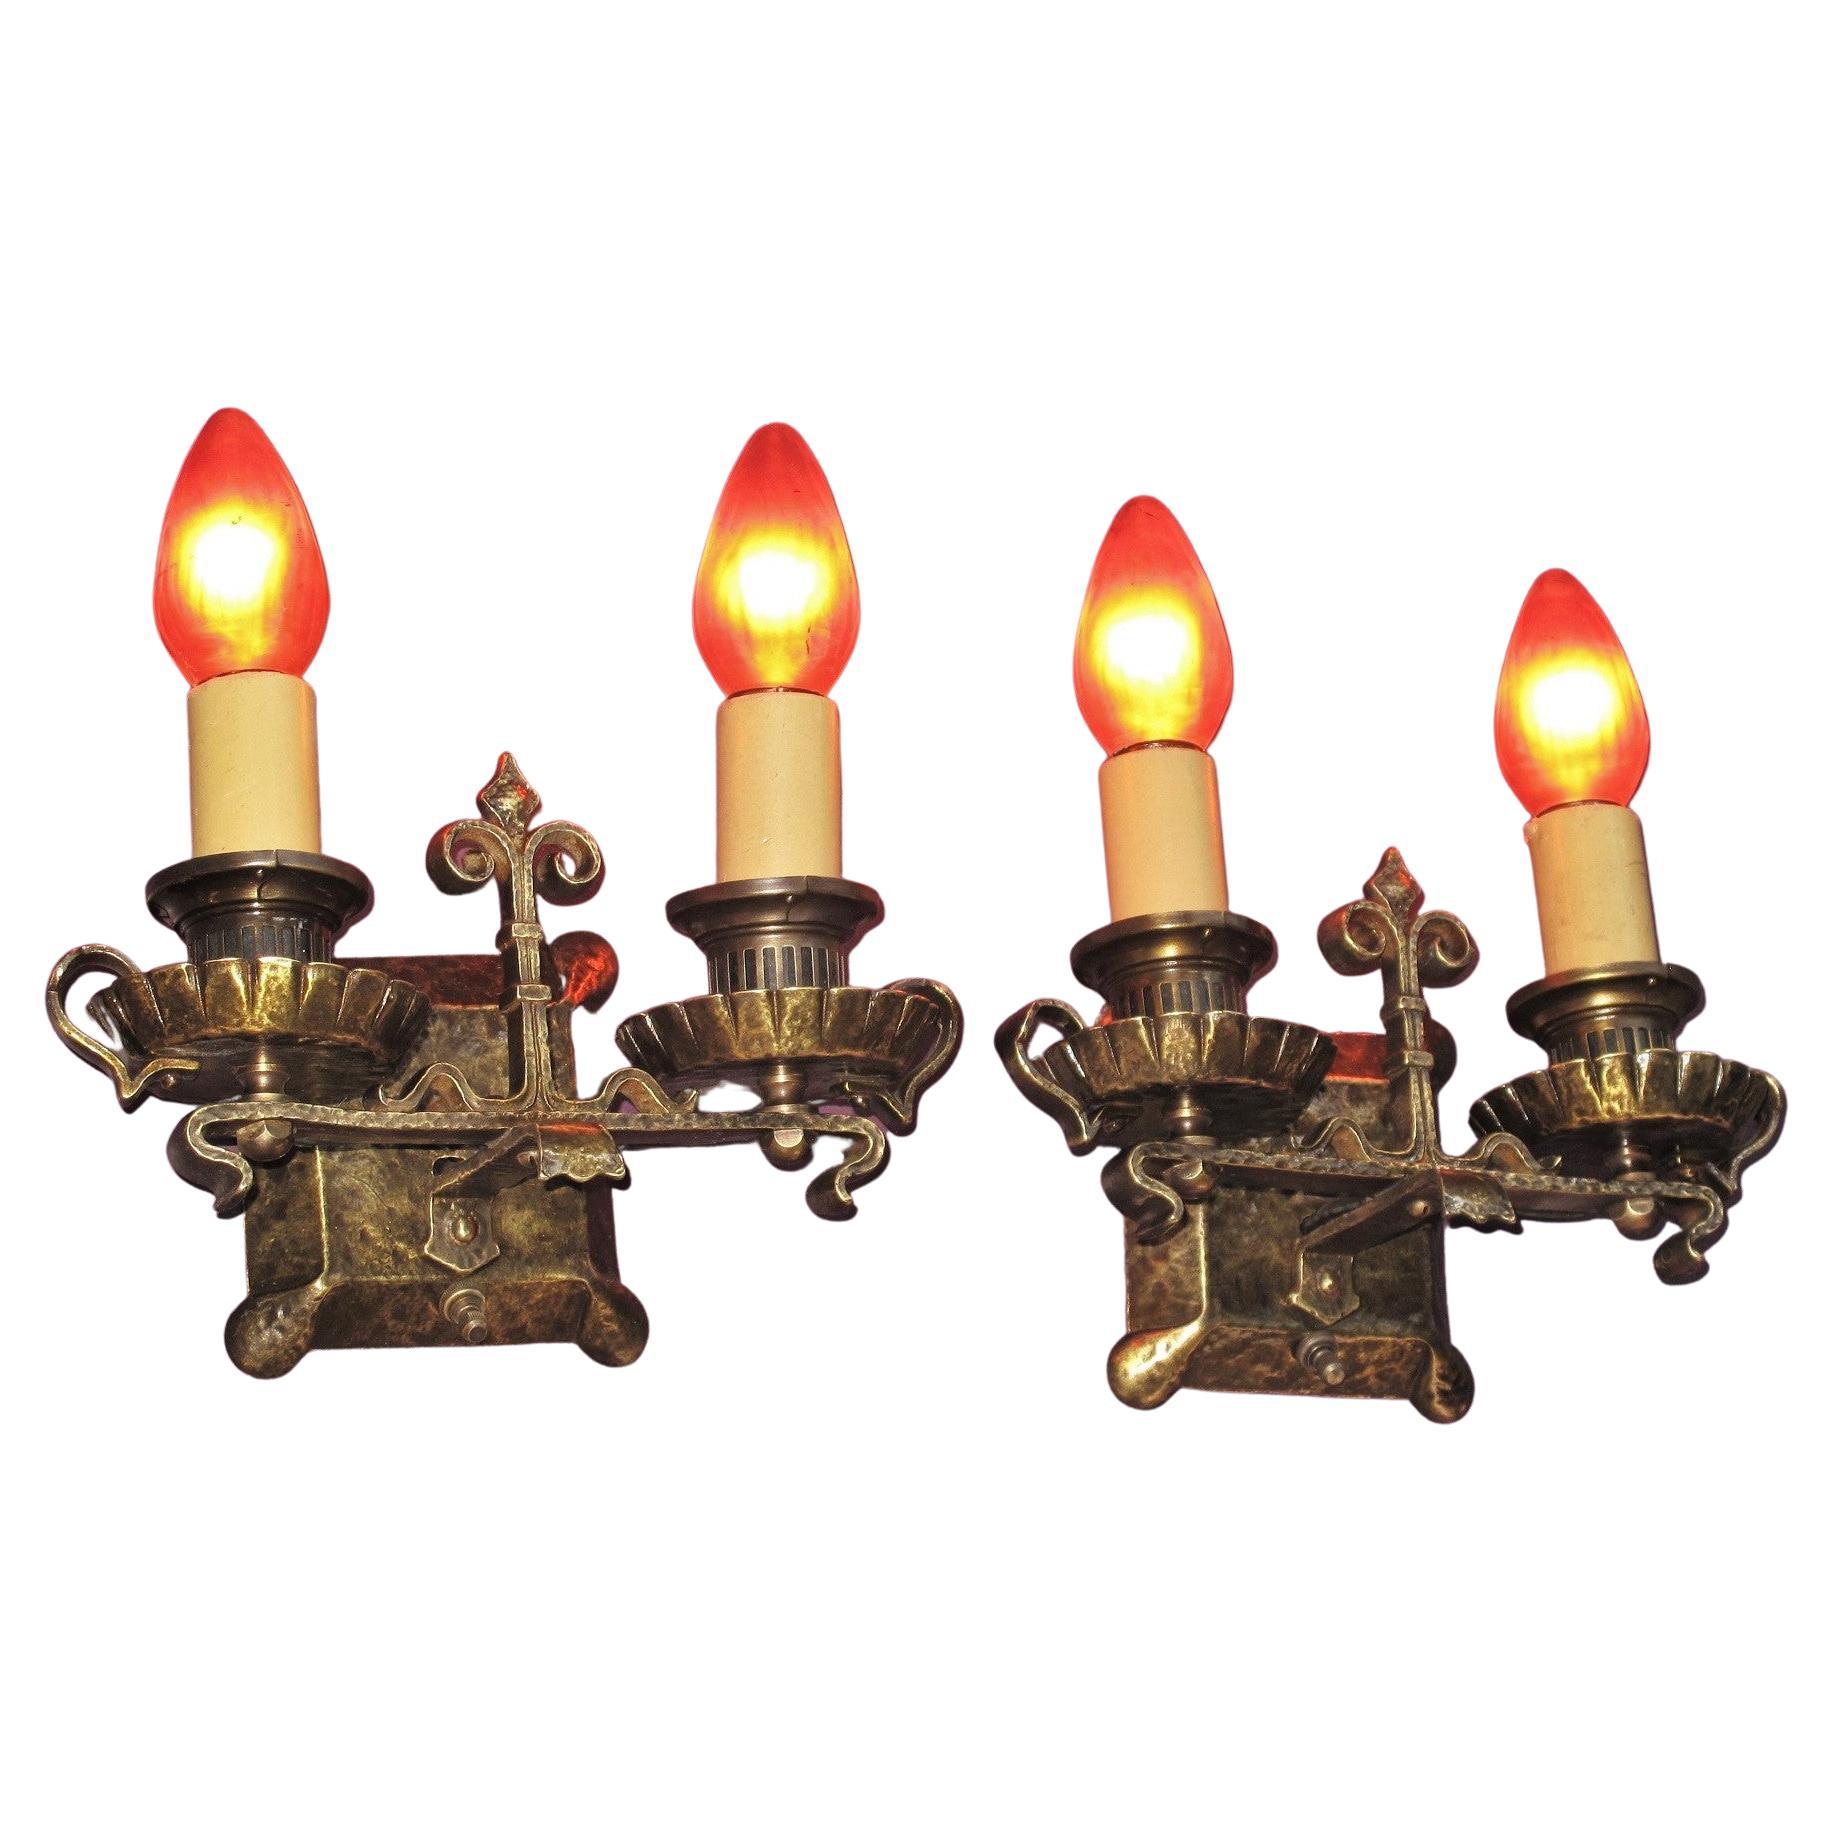 Very Well Made 2 Arm Solid Brass Revival Sconces Pair